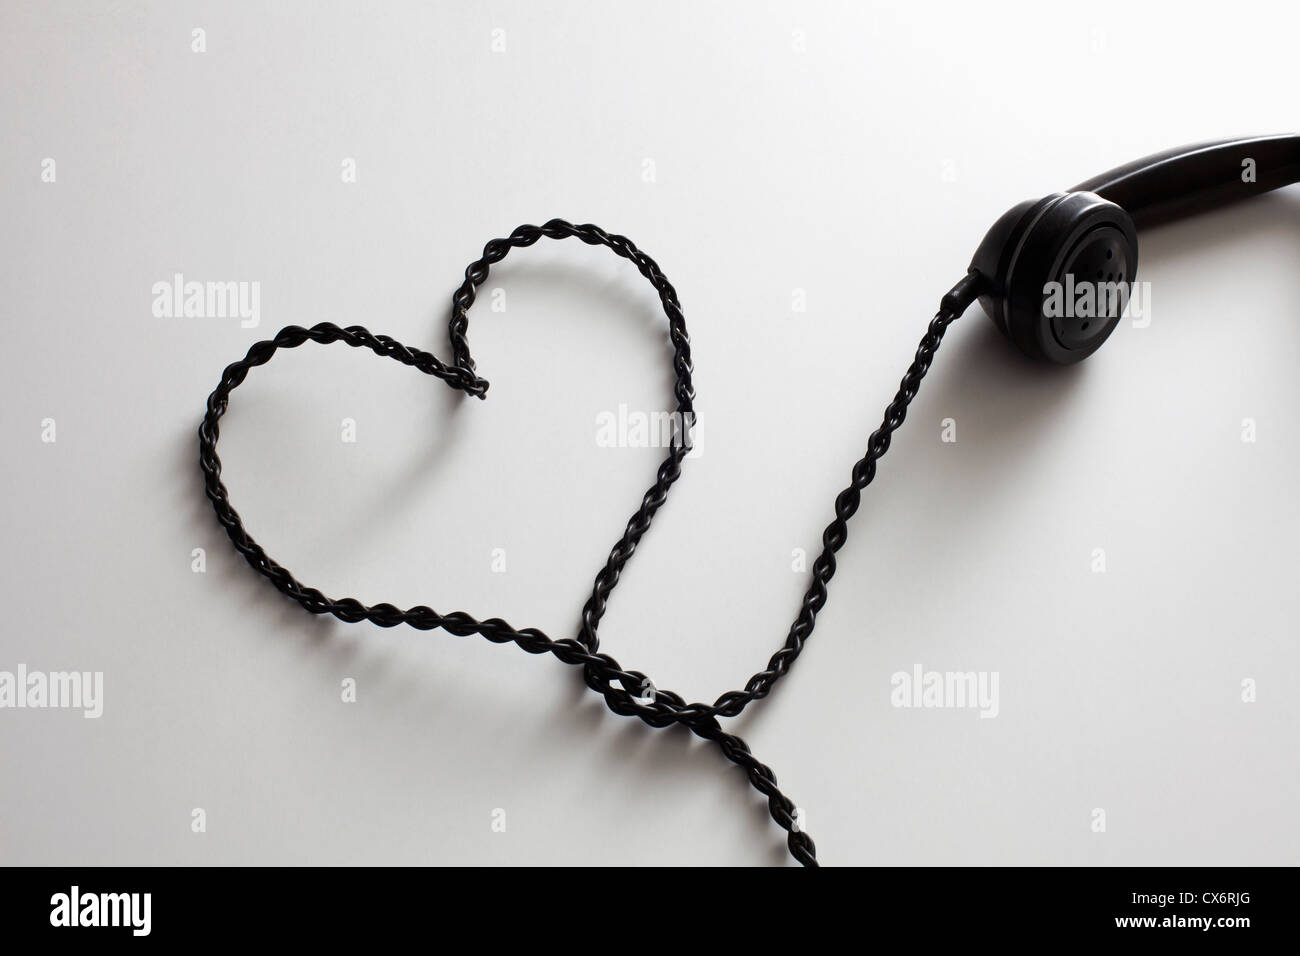 An old-fashioned telephone cord arranged into the shape of a heart Stock Photo